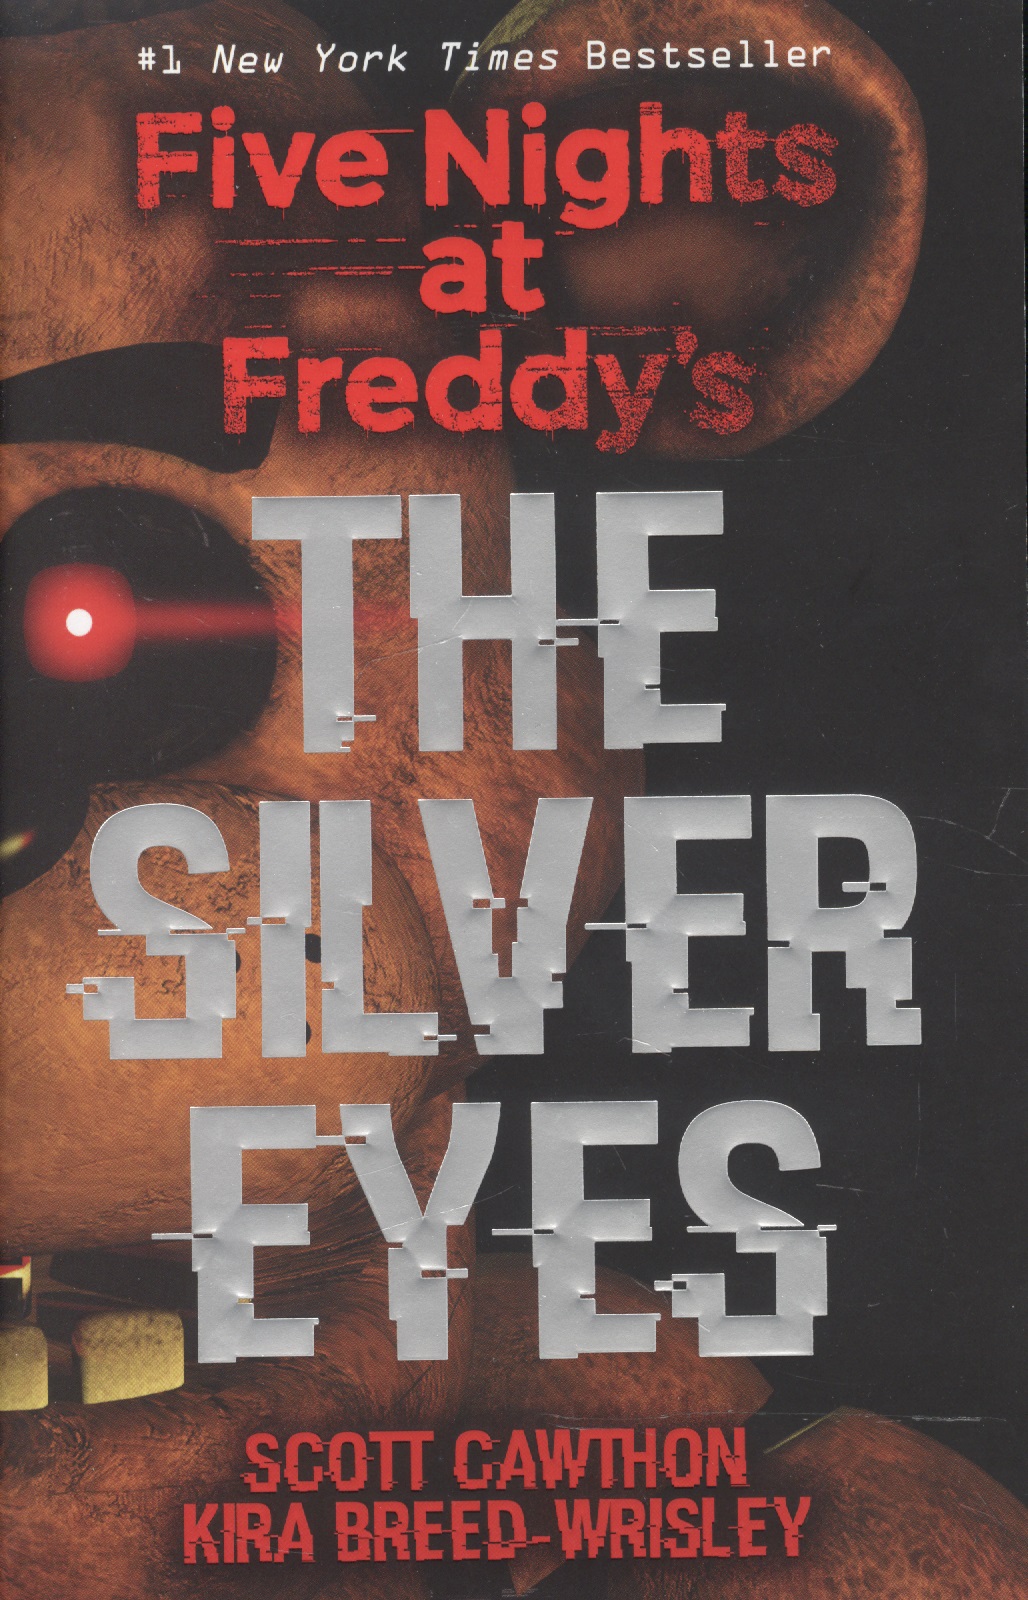 Five Nights at Freddys. The Silver Eyes